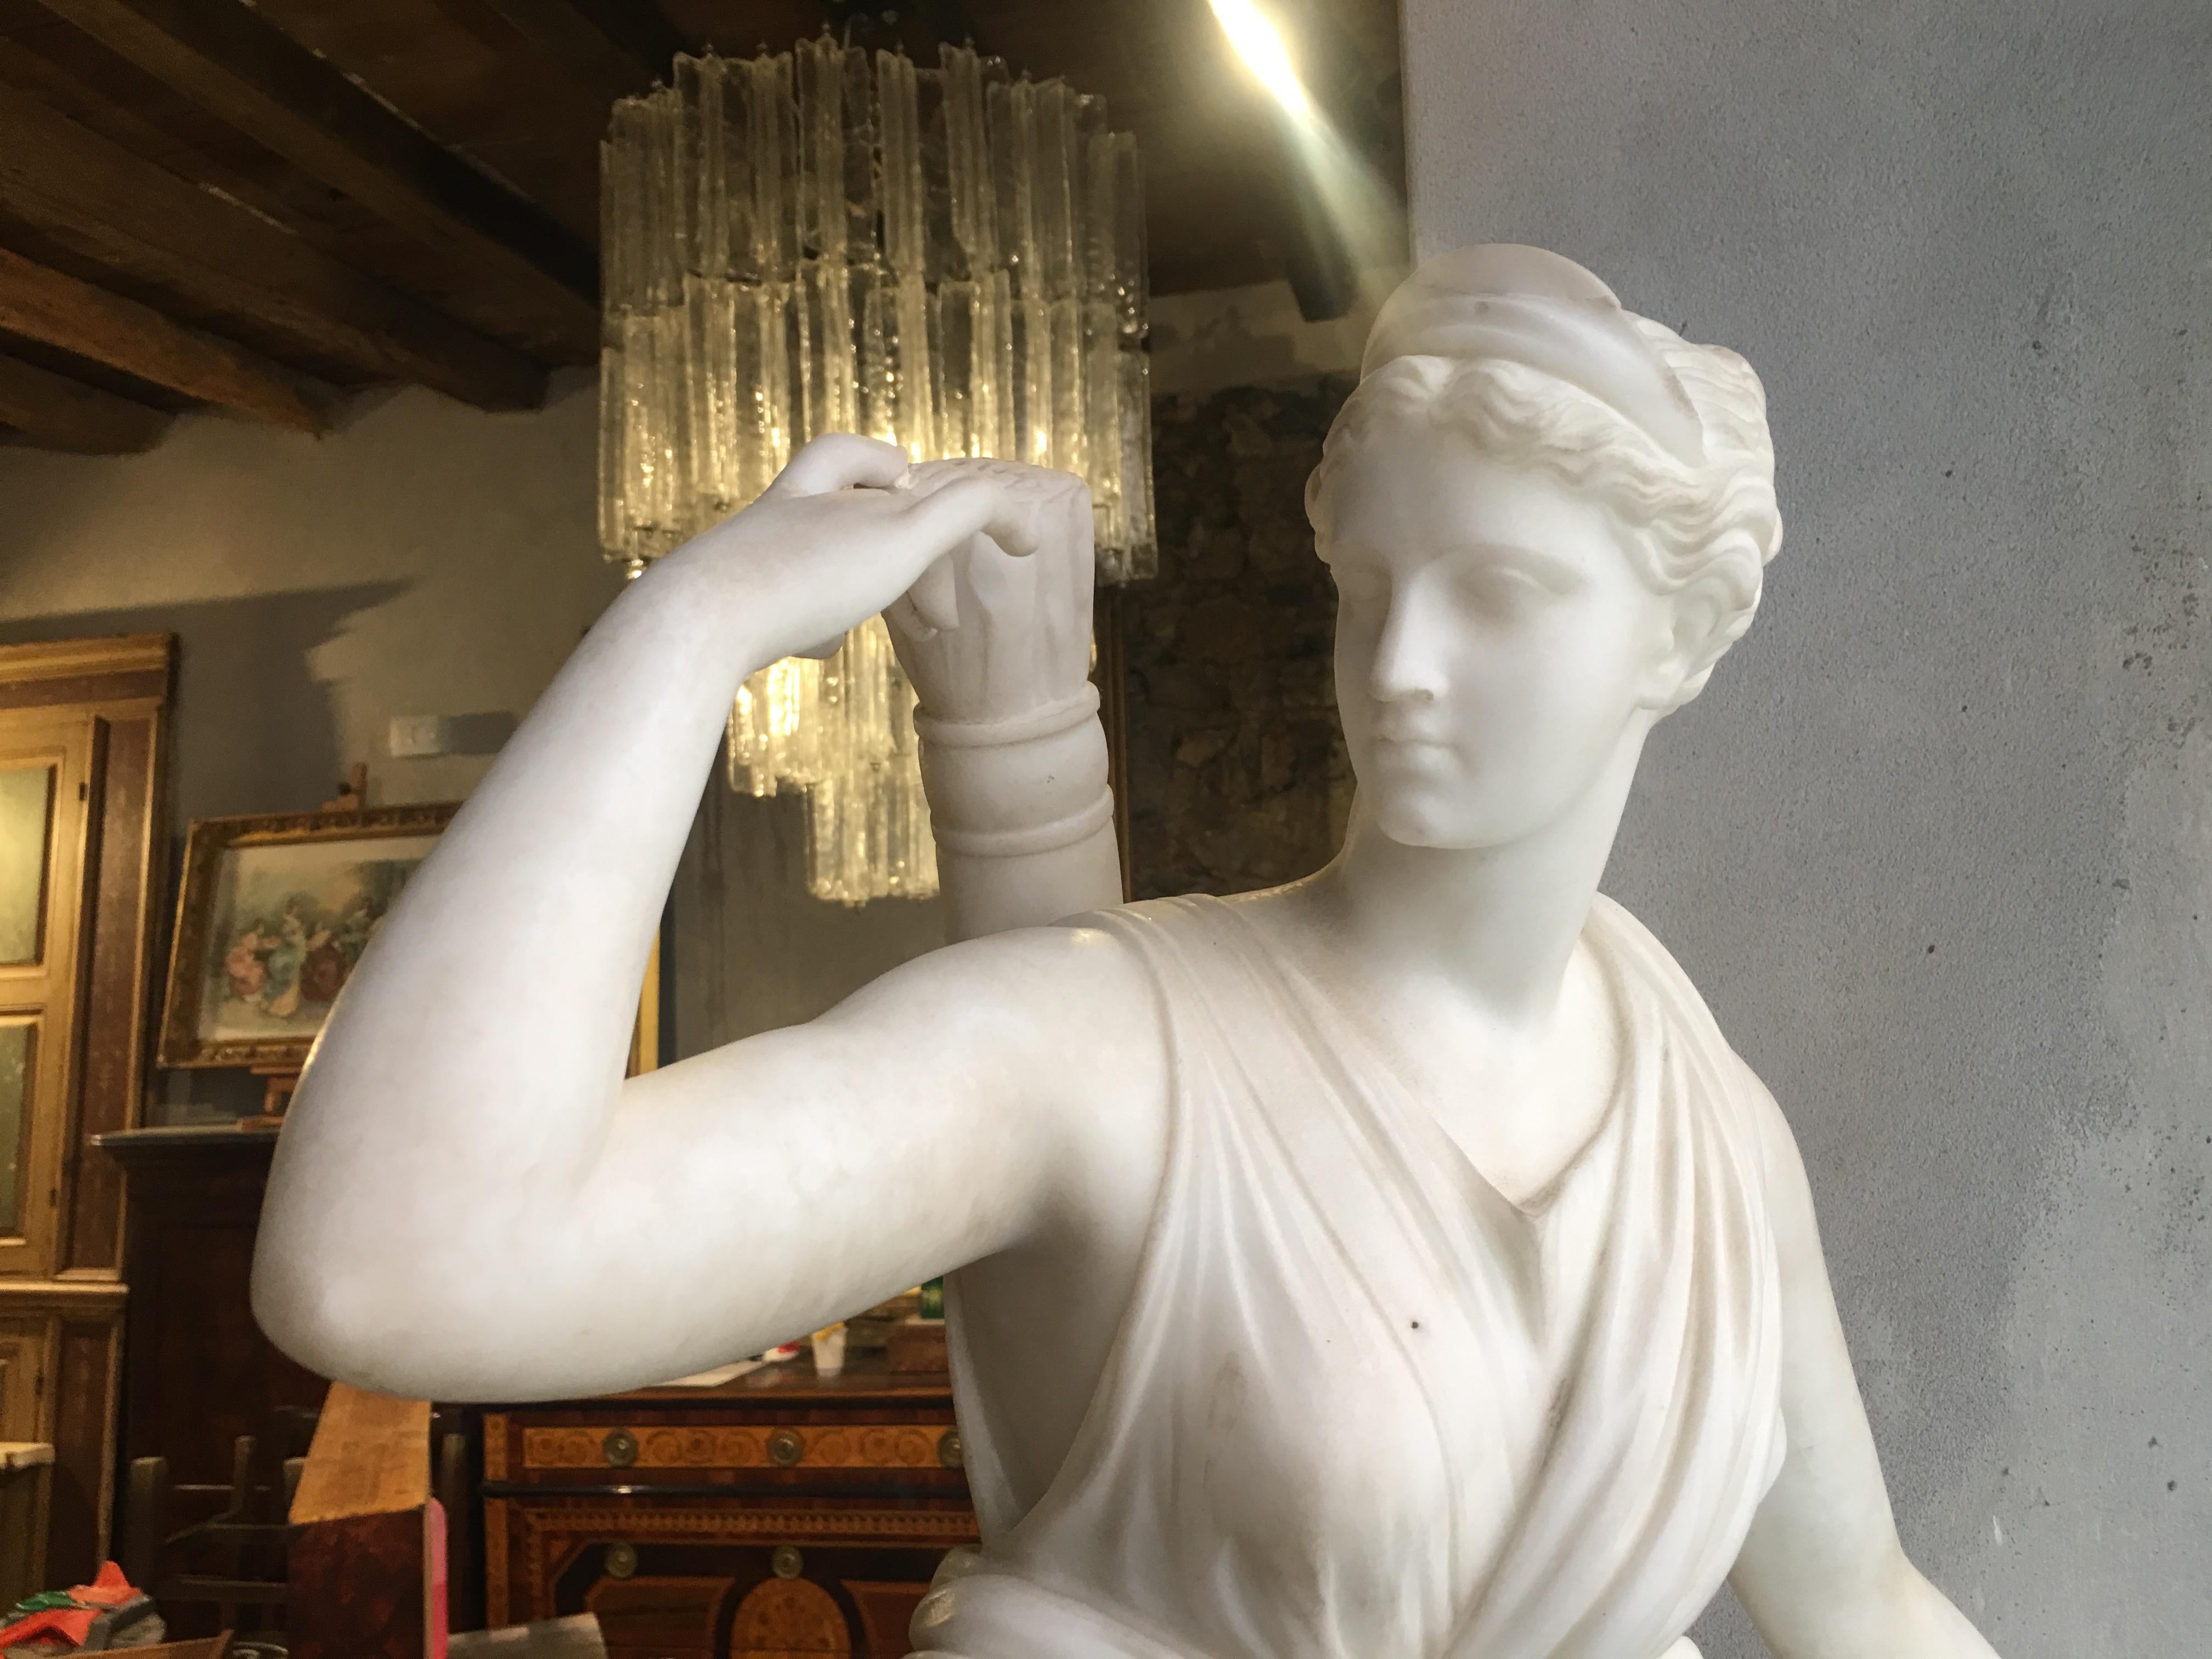 This marble statue made in Massa Carrara circa 1850 is a piece of refined beauty in sober neoclassical style.

Diana is a Roman goddess of the hunt, the moon, and nature, associated with wild animals and woodland. She is equated with the Greek